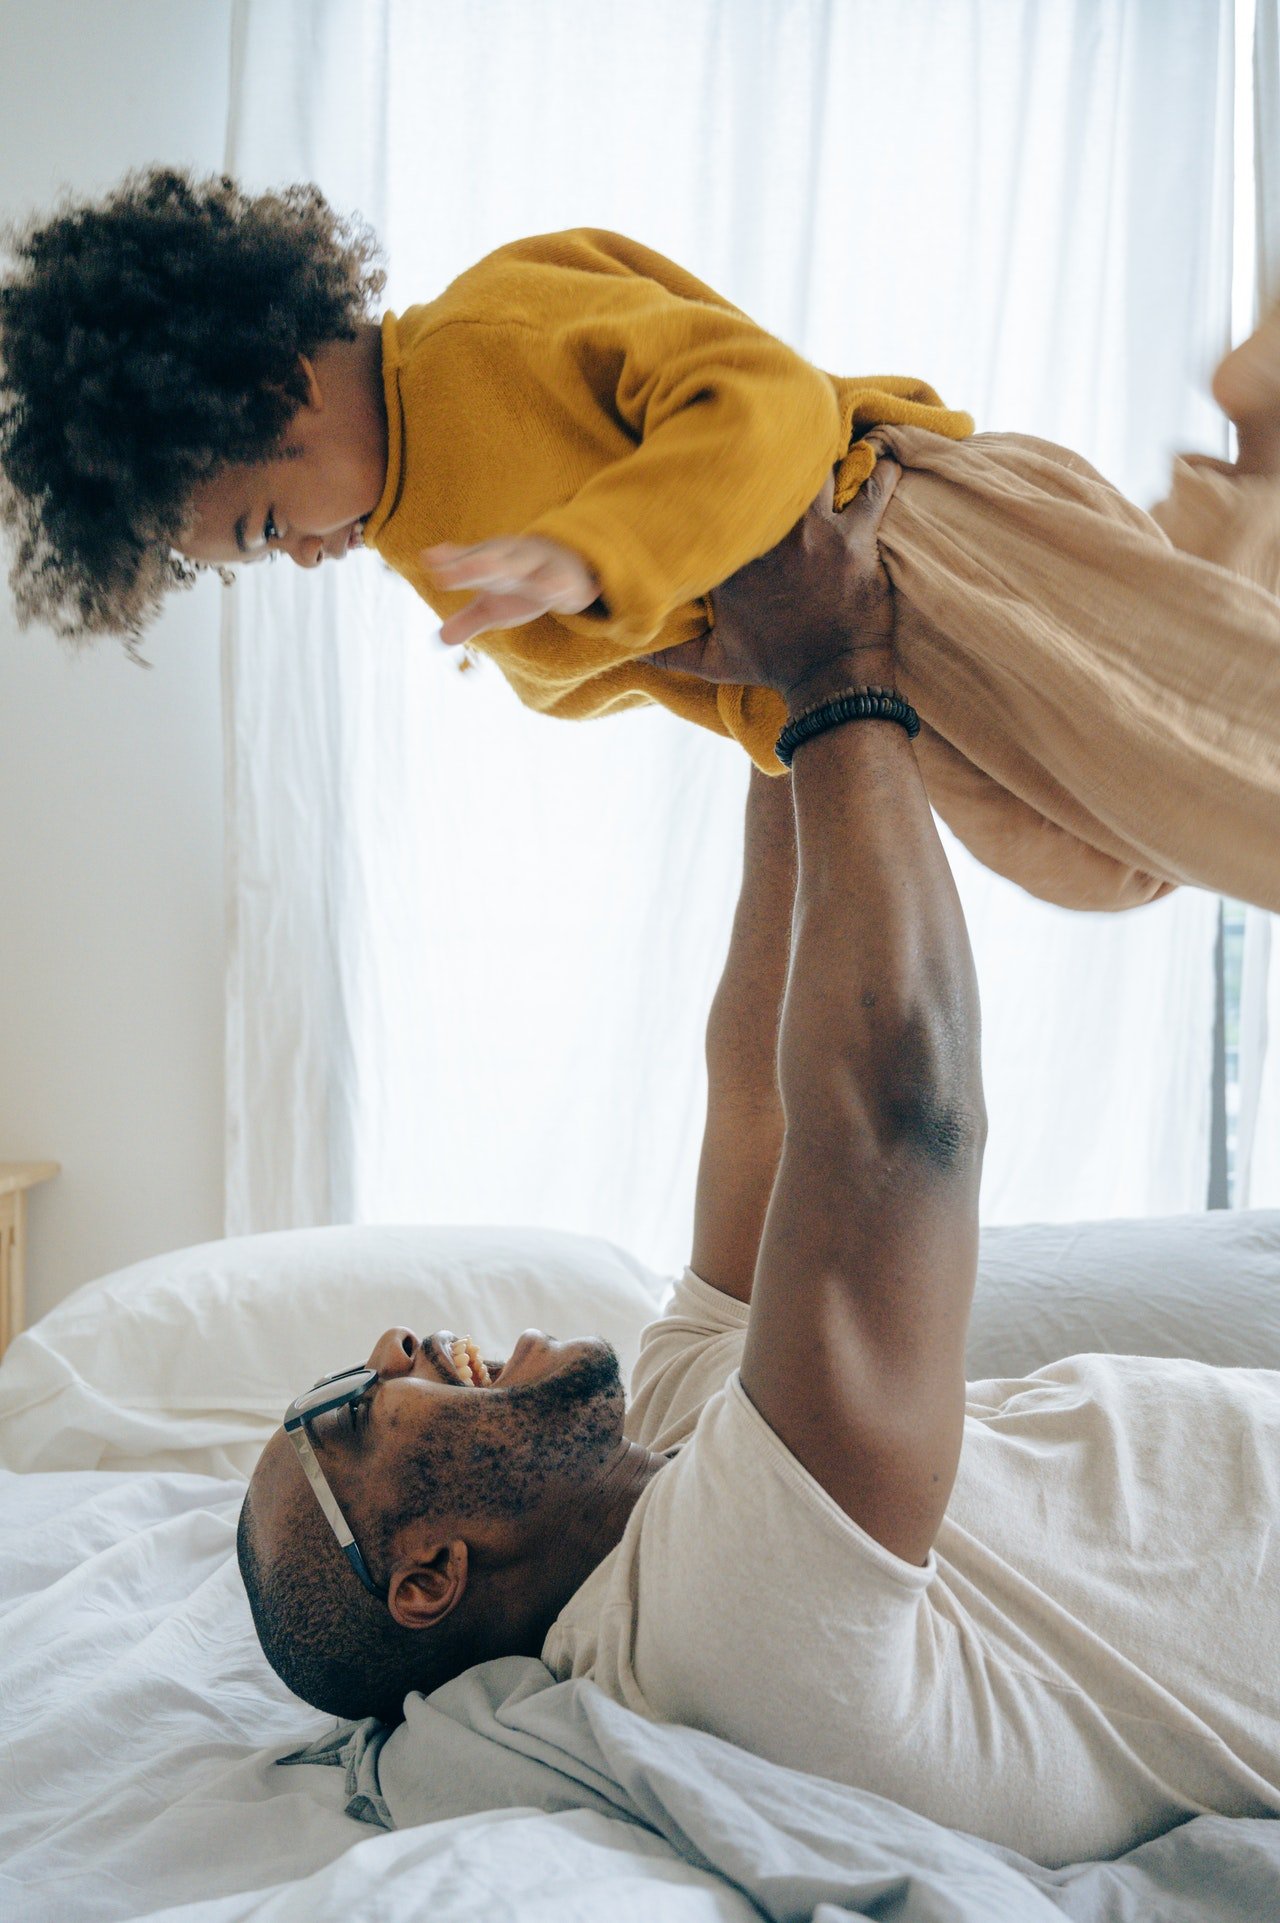 Father lifting his son on the bed | Source: Pexels